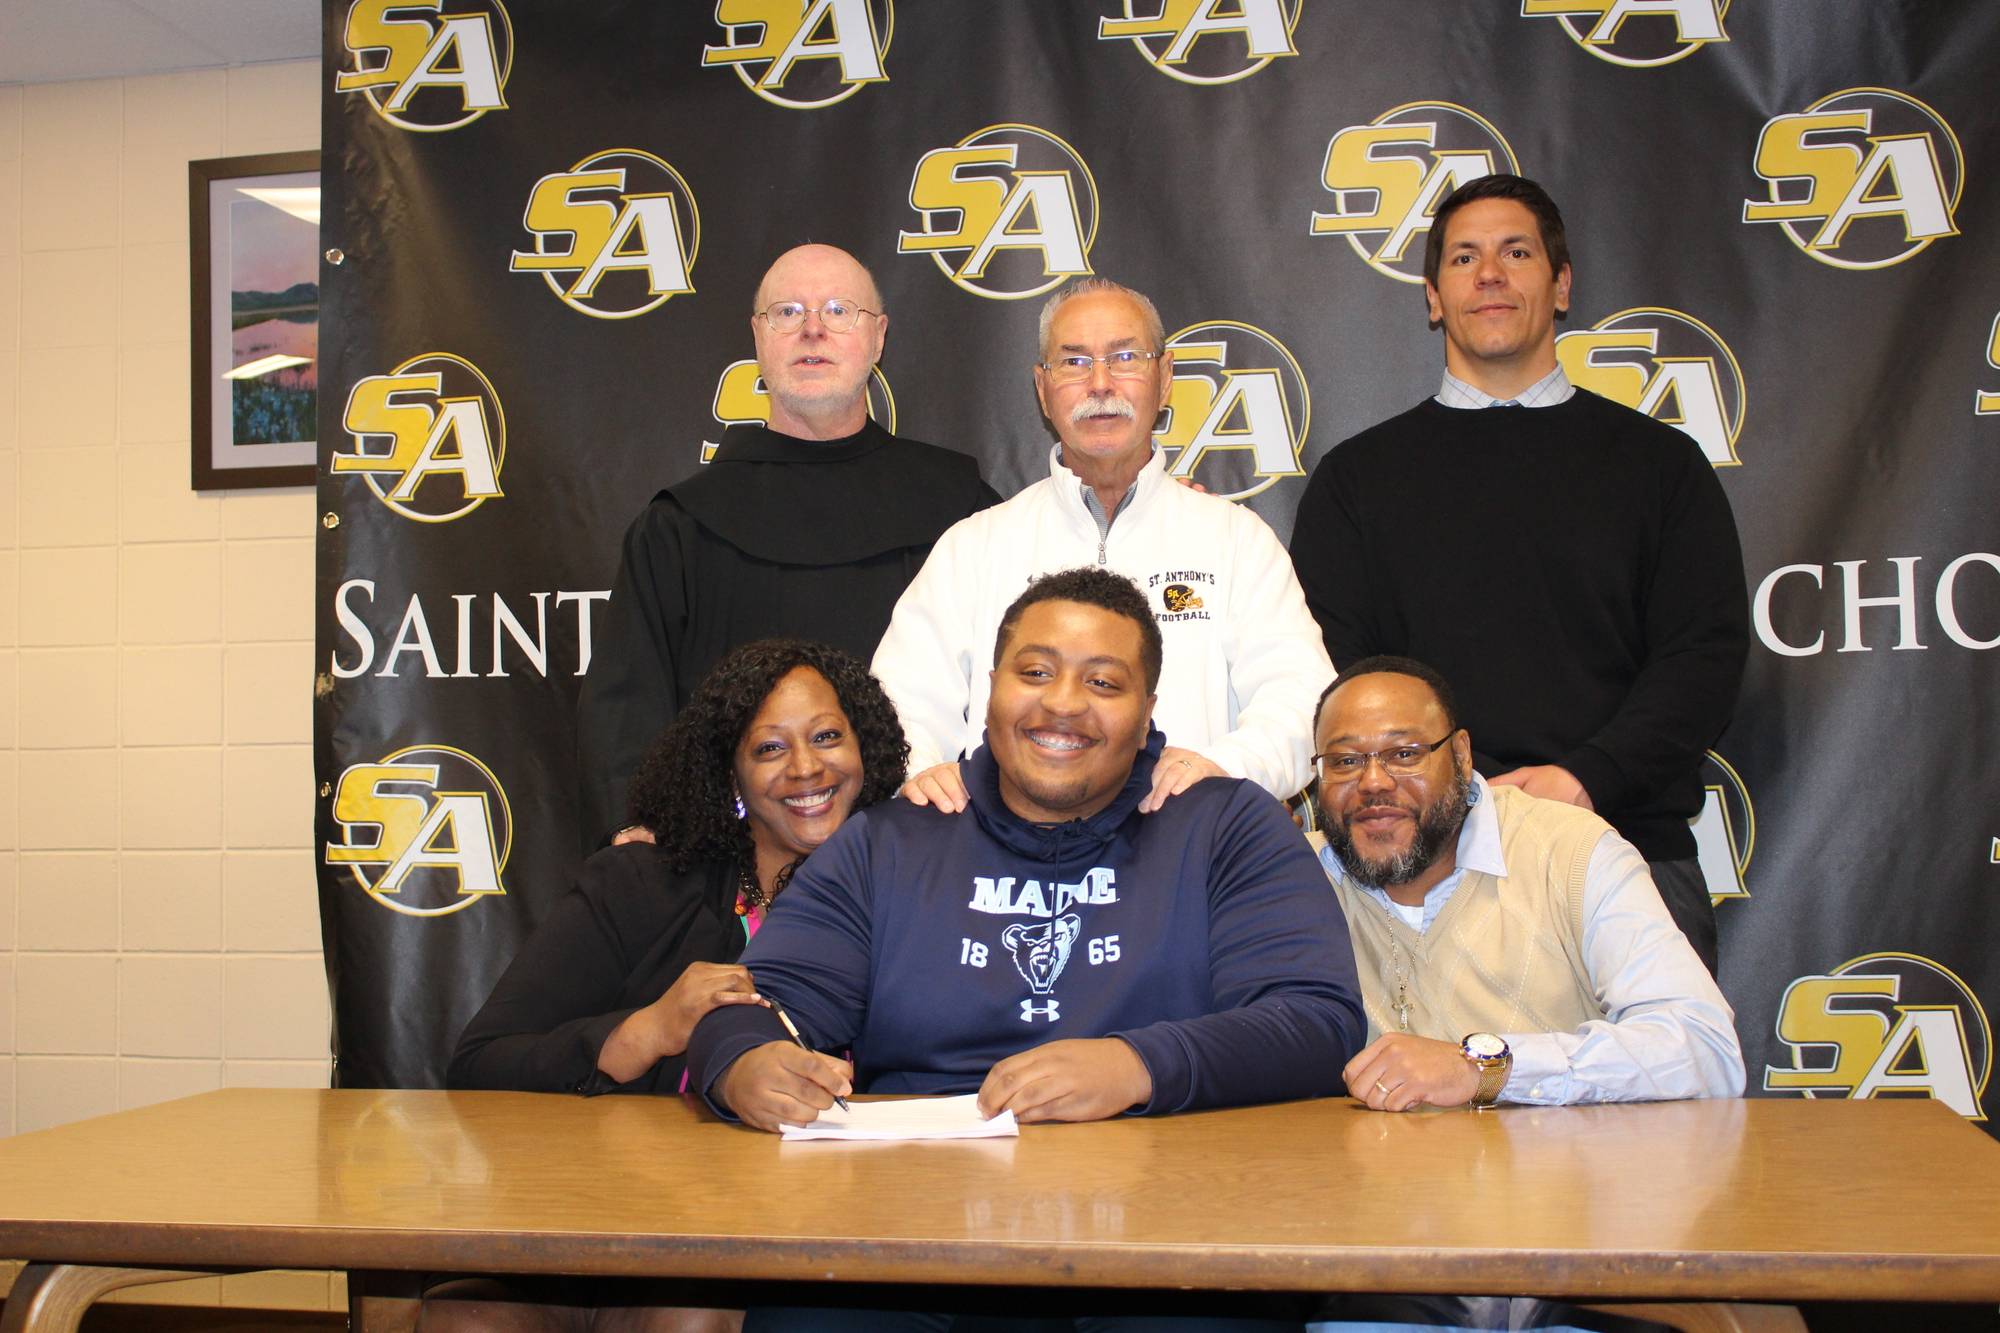 Congratulations Justin Williford on his commitment to the University of Maine to play football